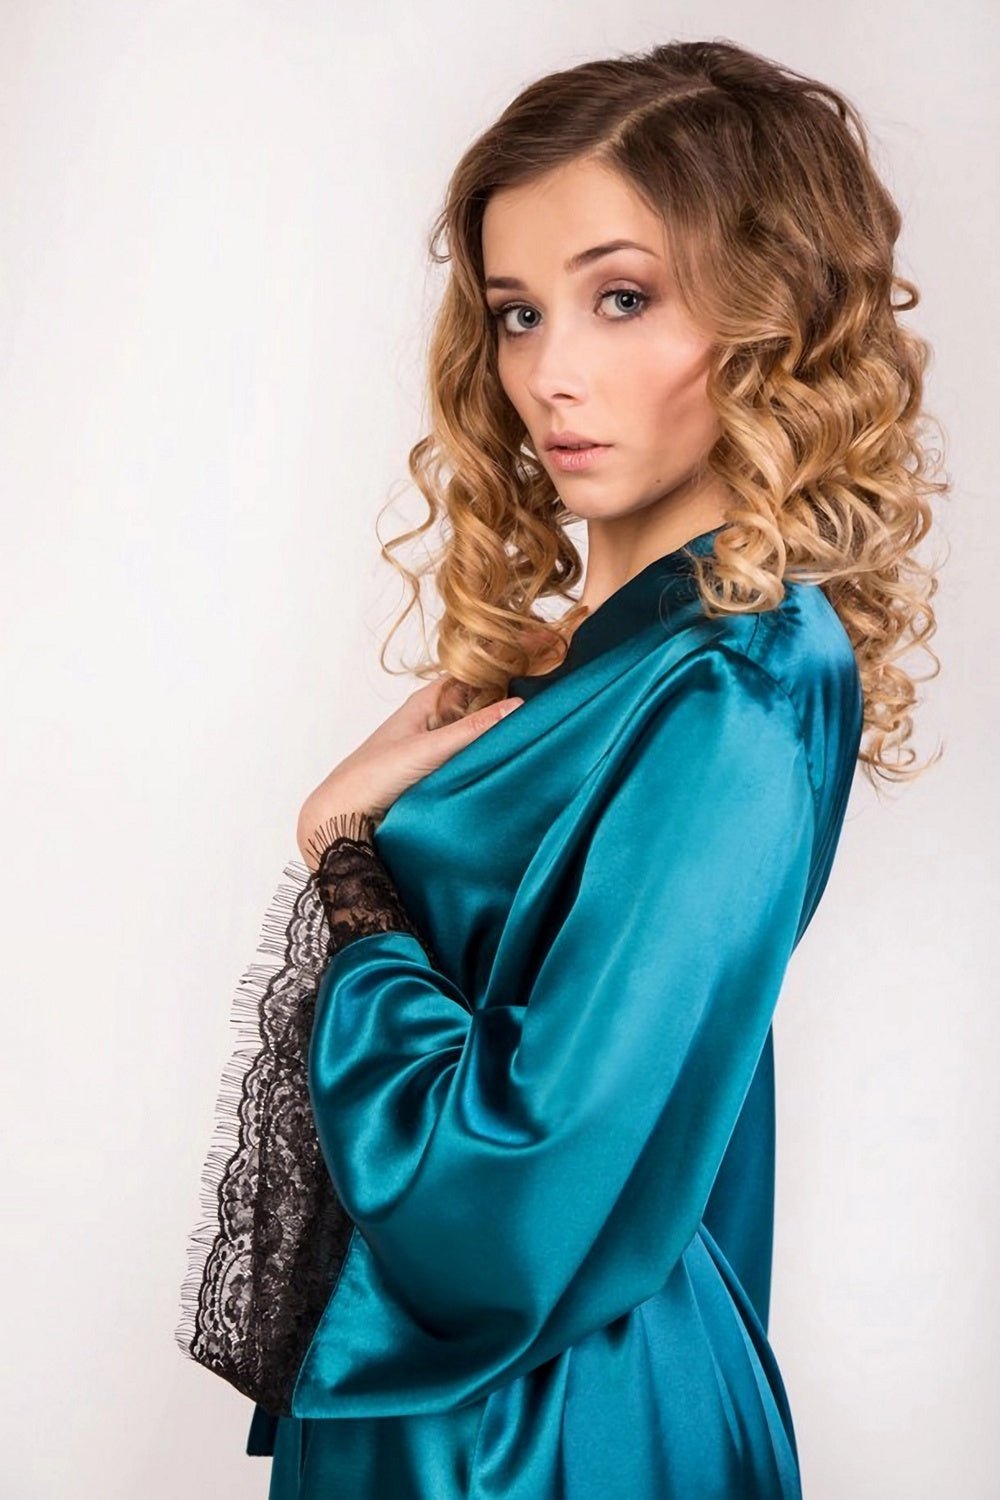 Short-length satin robe with lace-trim sleeves for added allure